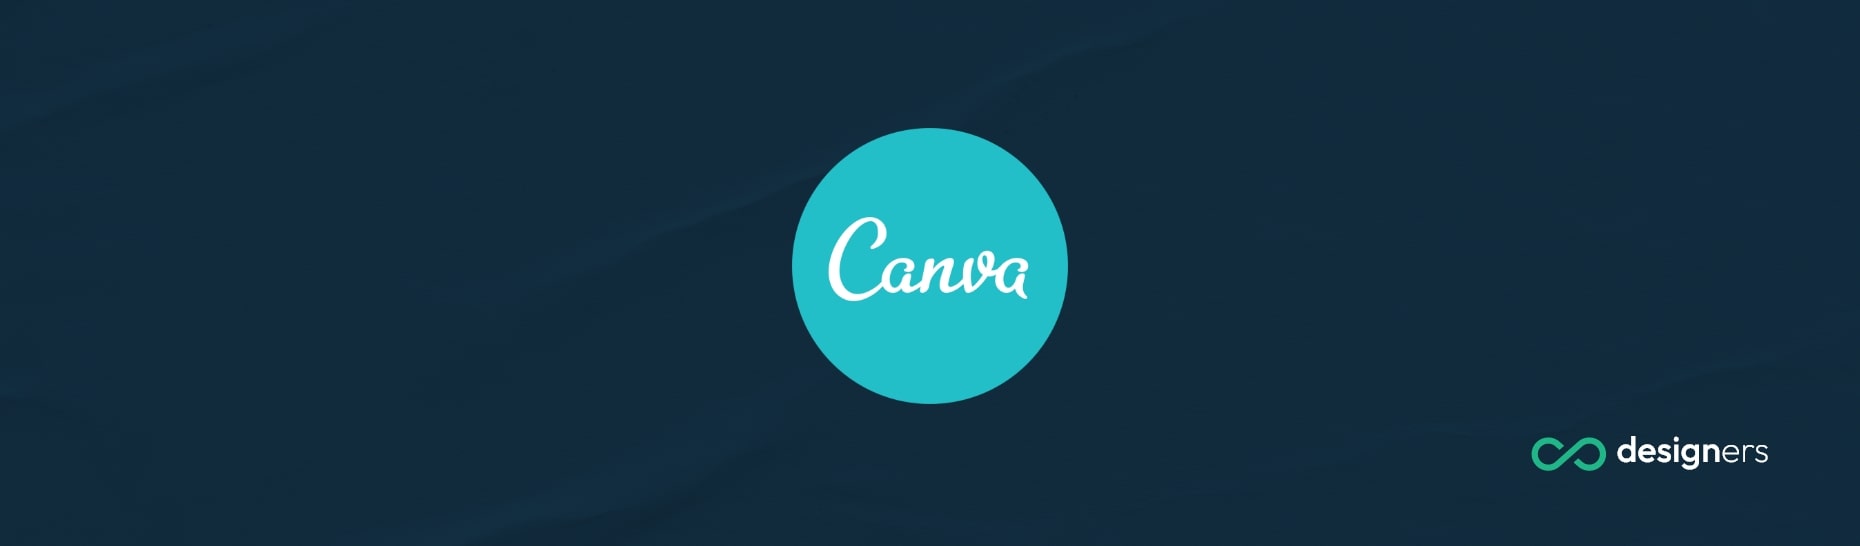 Can I publish Canva designs for commercial use?